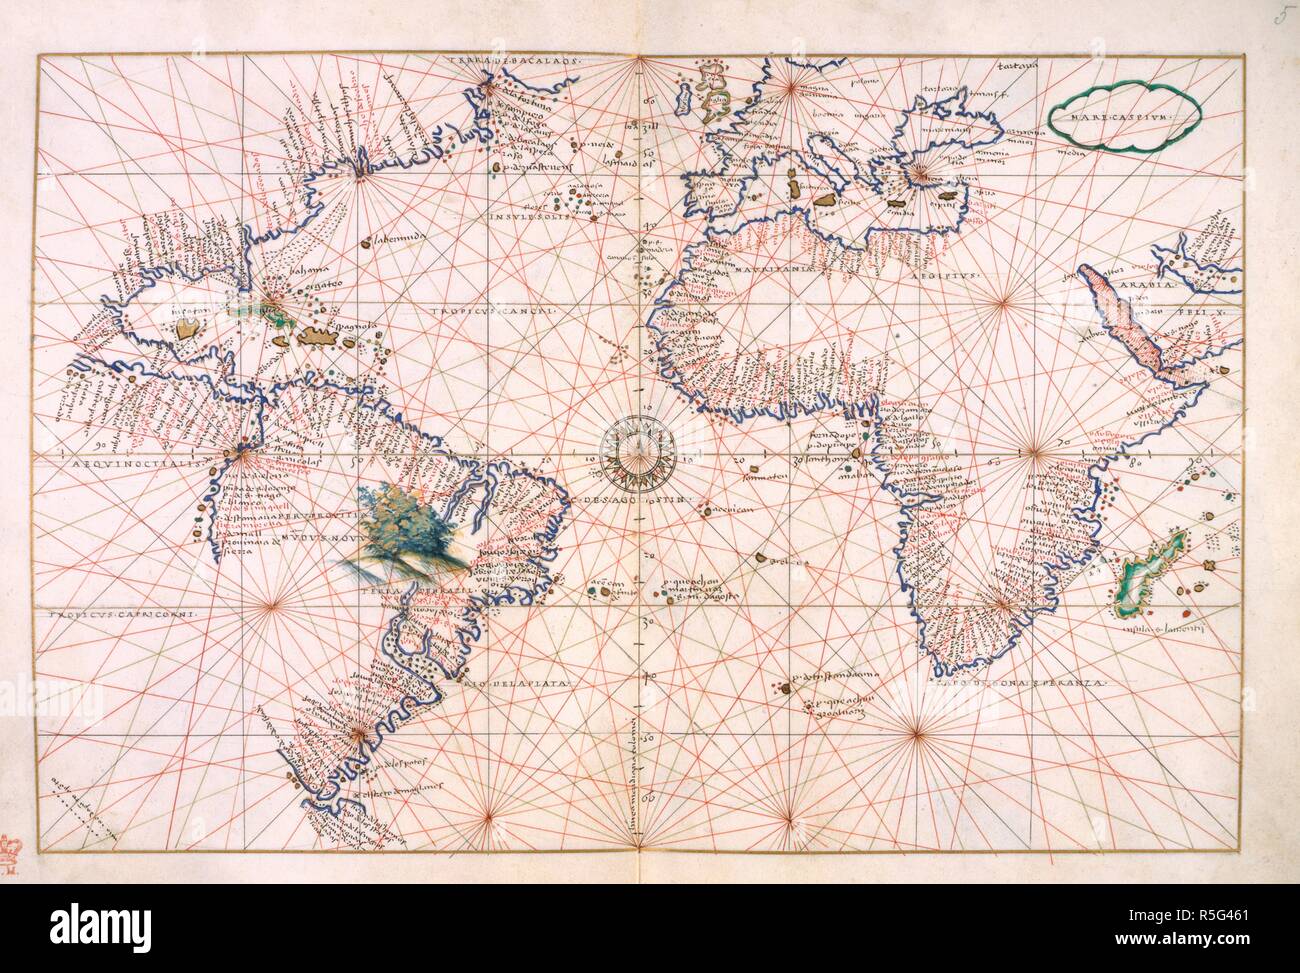 Chart of western hemisphere. A Portolan atlas. Venice, circa 1540. Chart of the western hemisphere including the east coast of America, the Atlantic Ocean, Europe and Africa.  Image taken from A Portolan atlas.  Originally published/produced in Venice, circa 1540. . Source: Add. 18154, ff.4v-5. Stock Photo